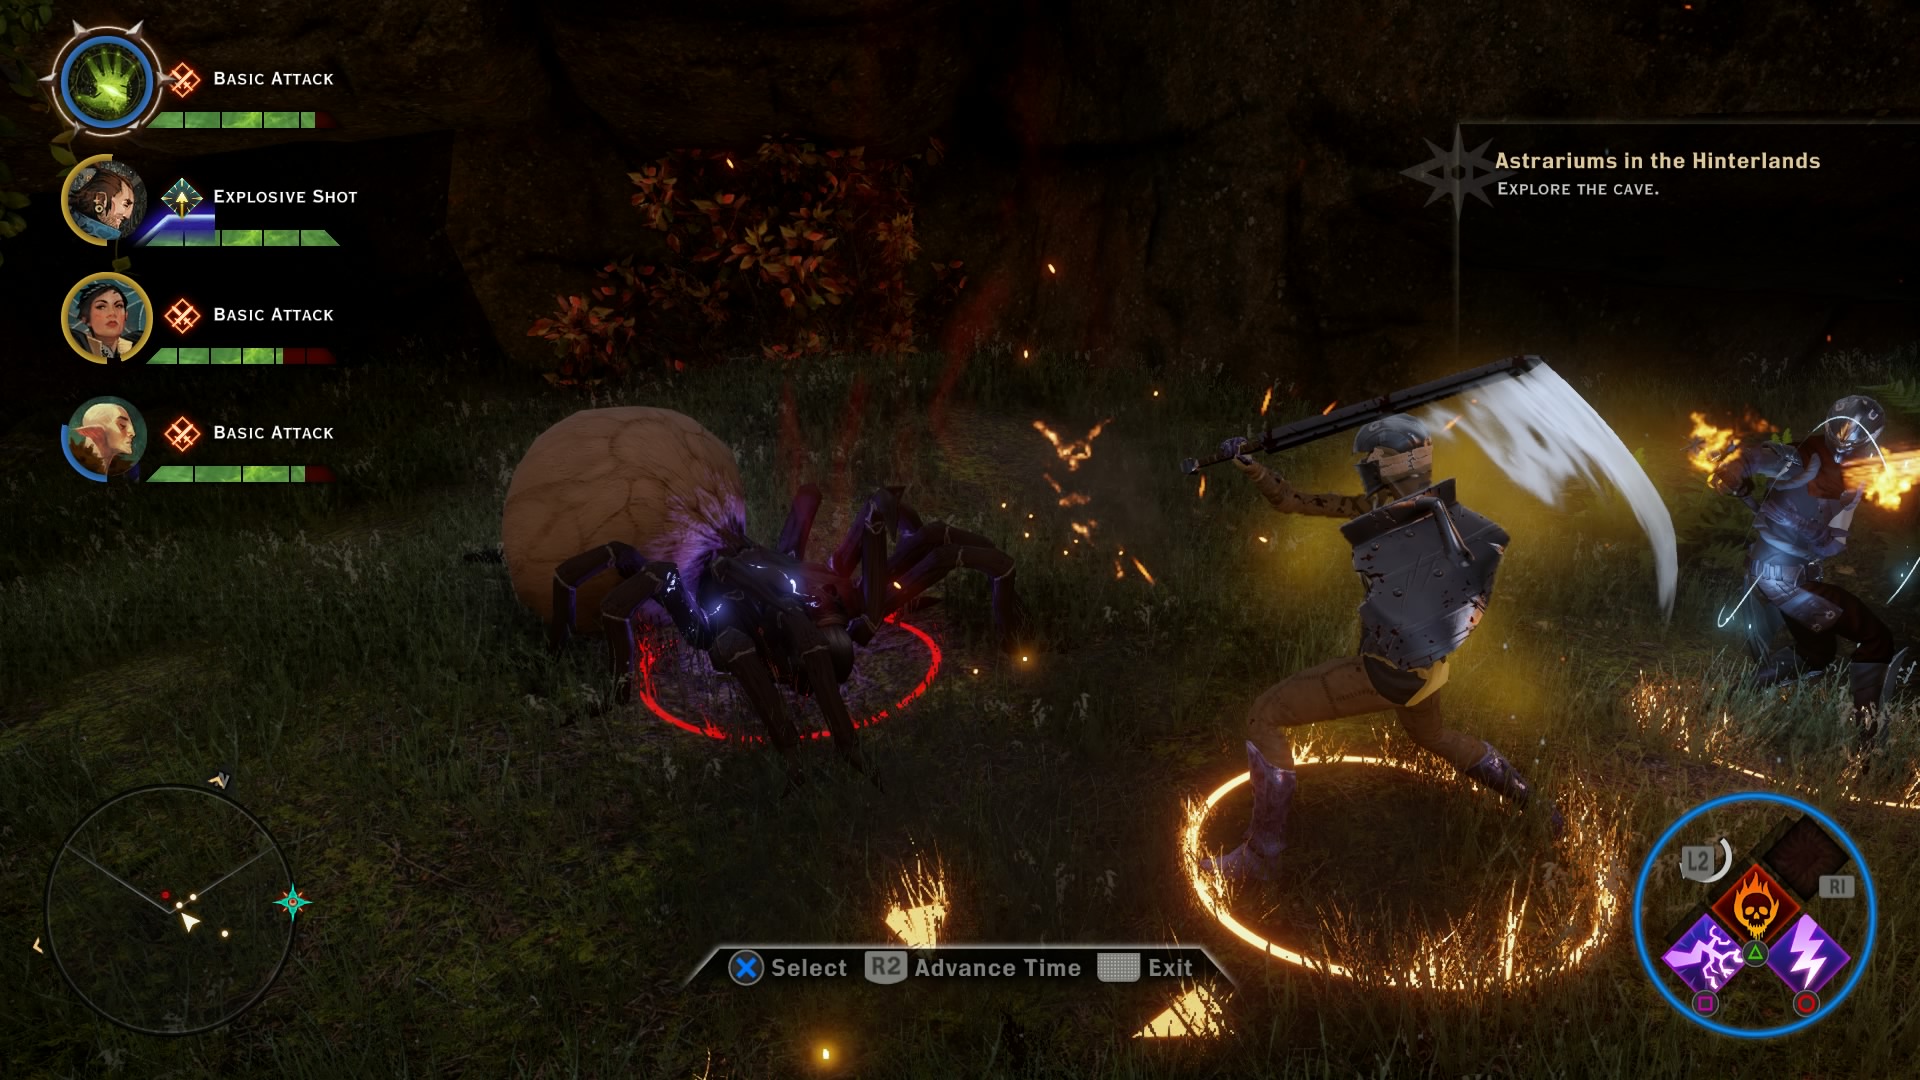 Players Can Use Numerous Skills and Spells on Enemies